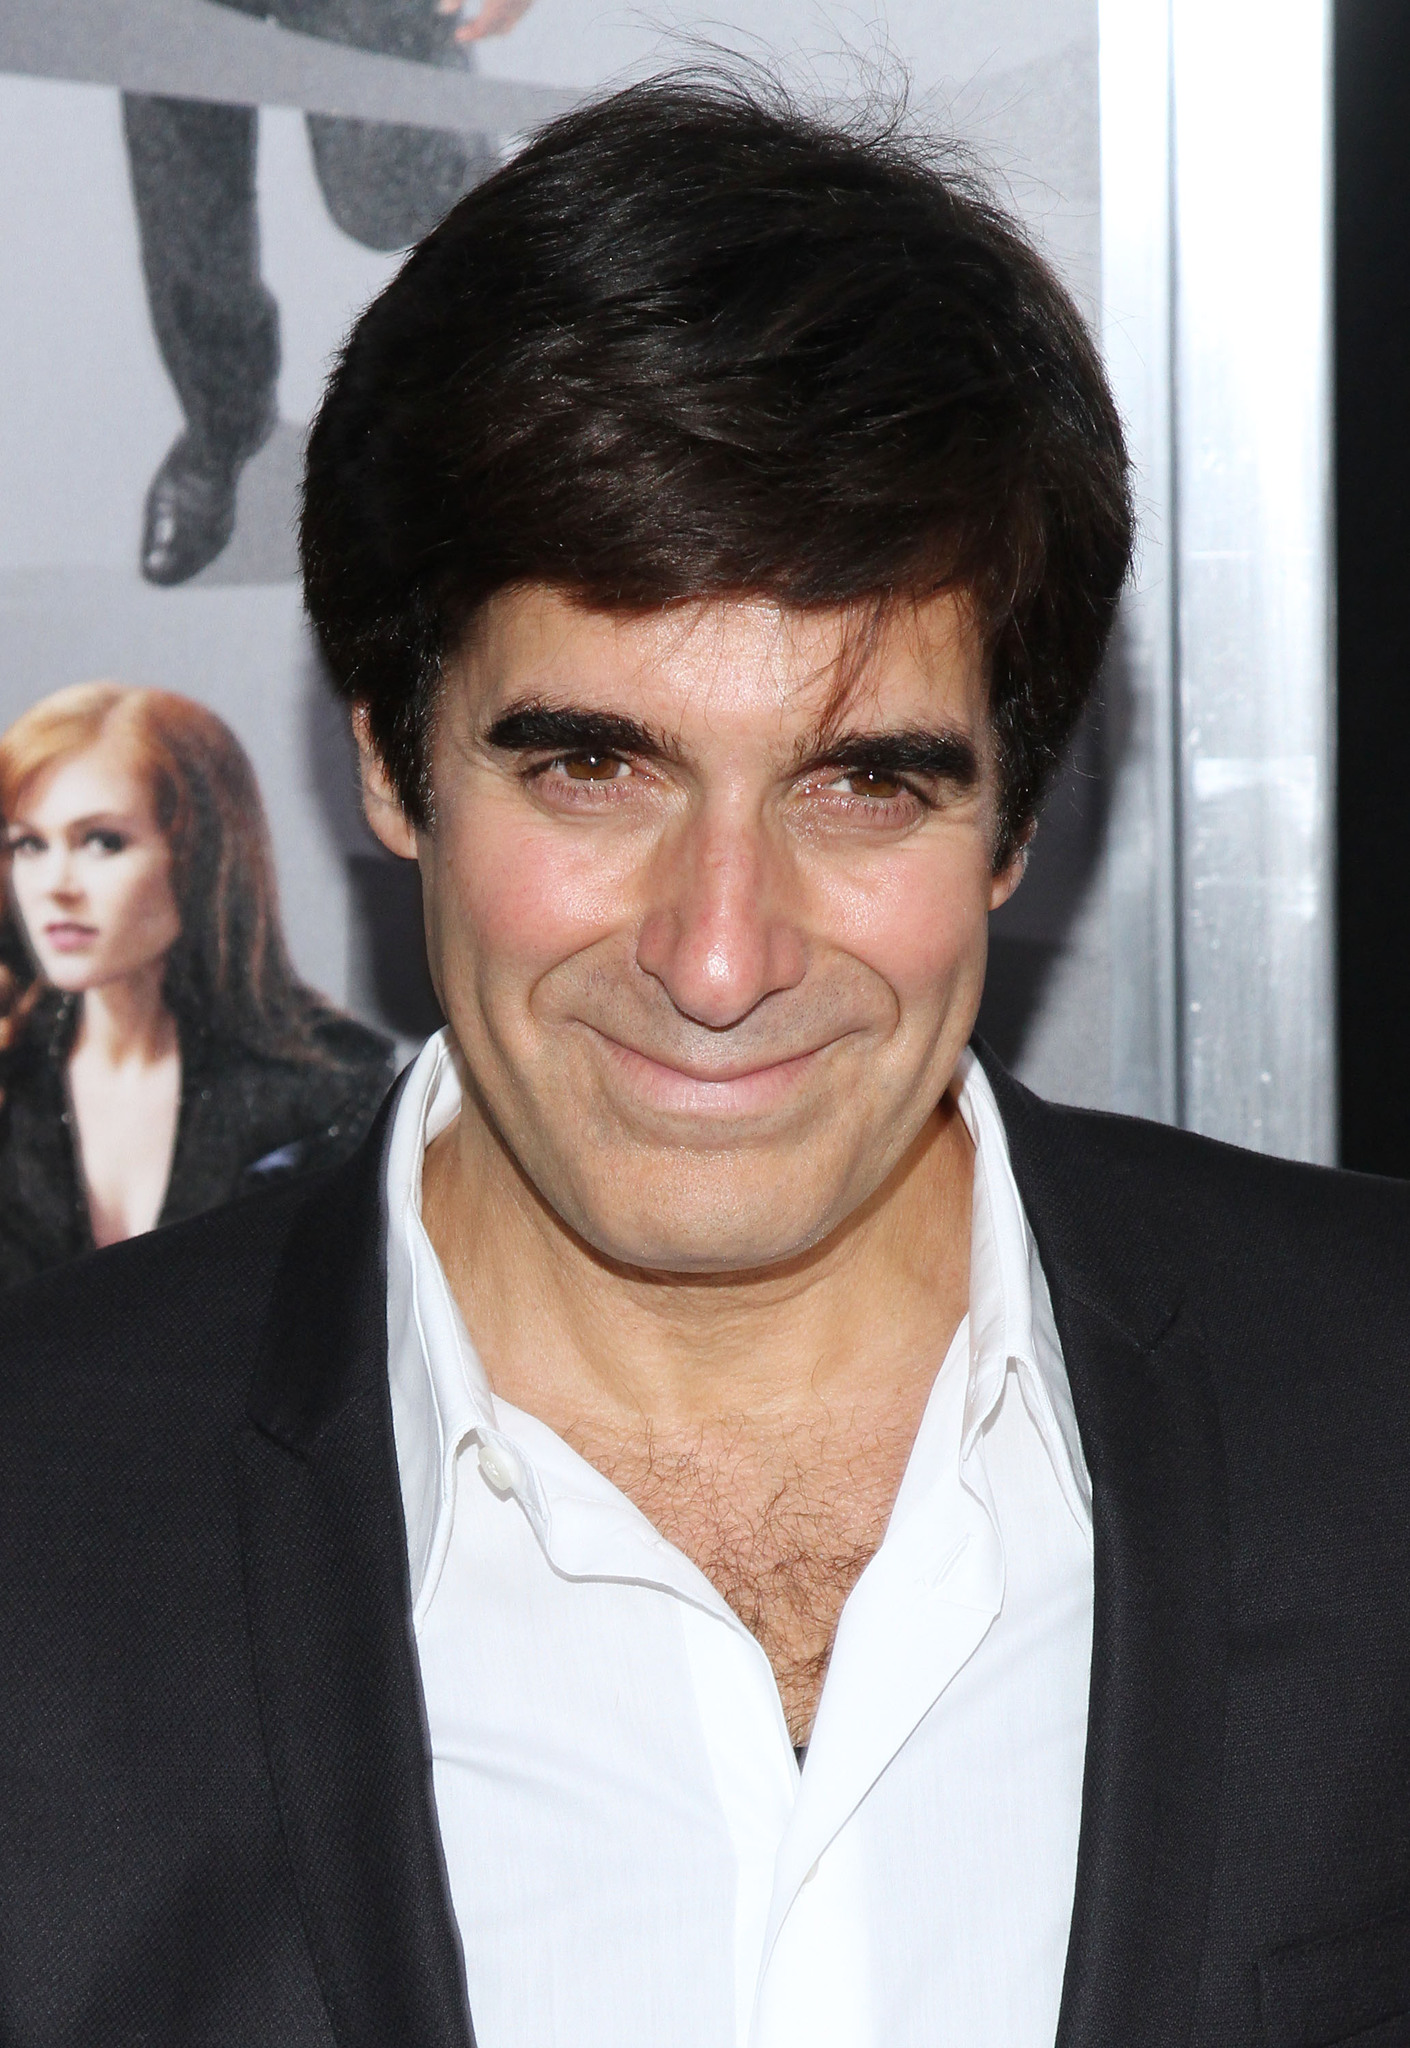 David Copperfield at event of Apgaules meistrai (2013)